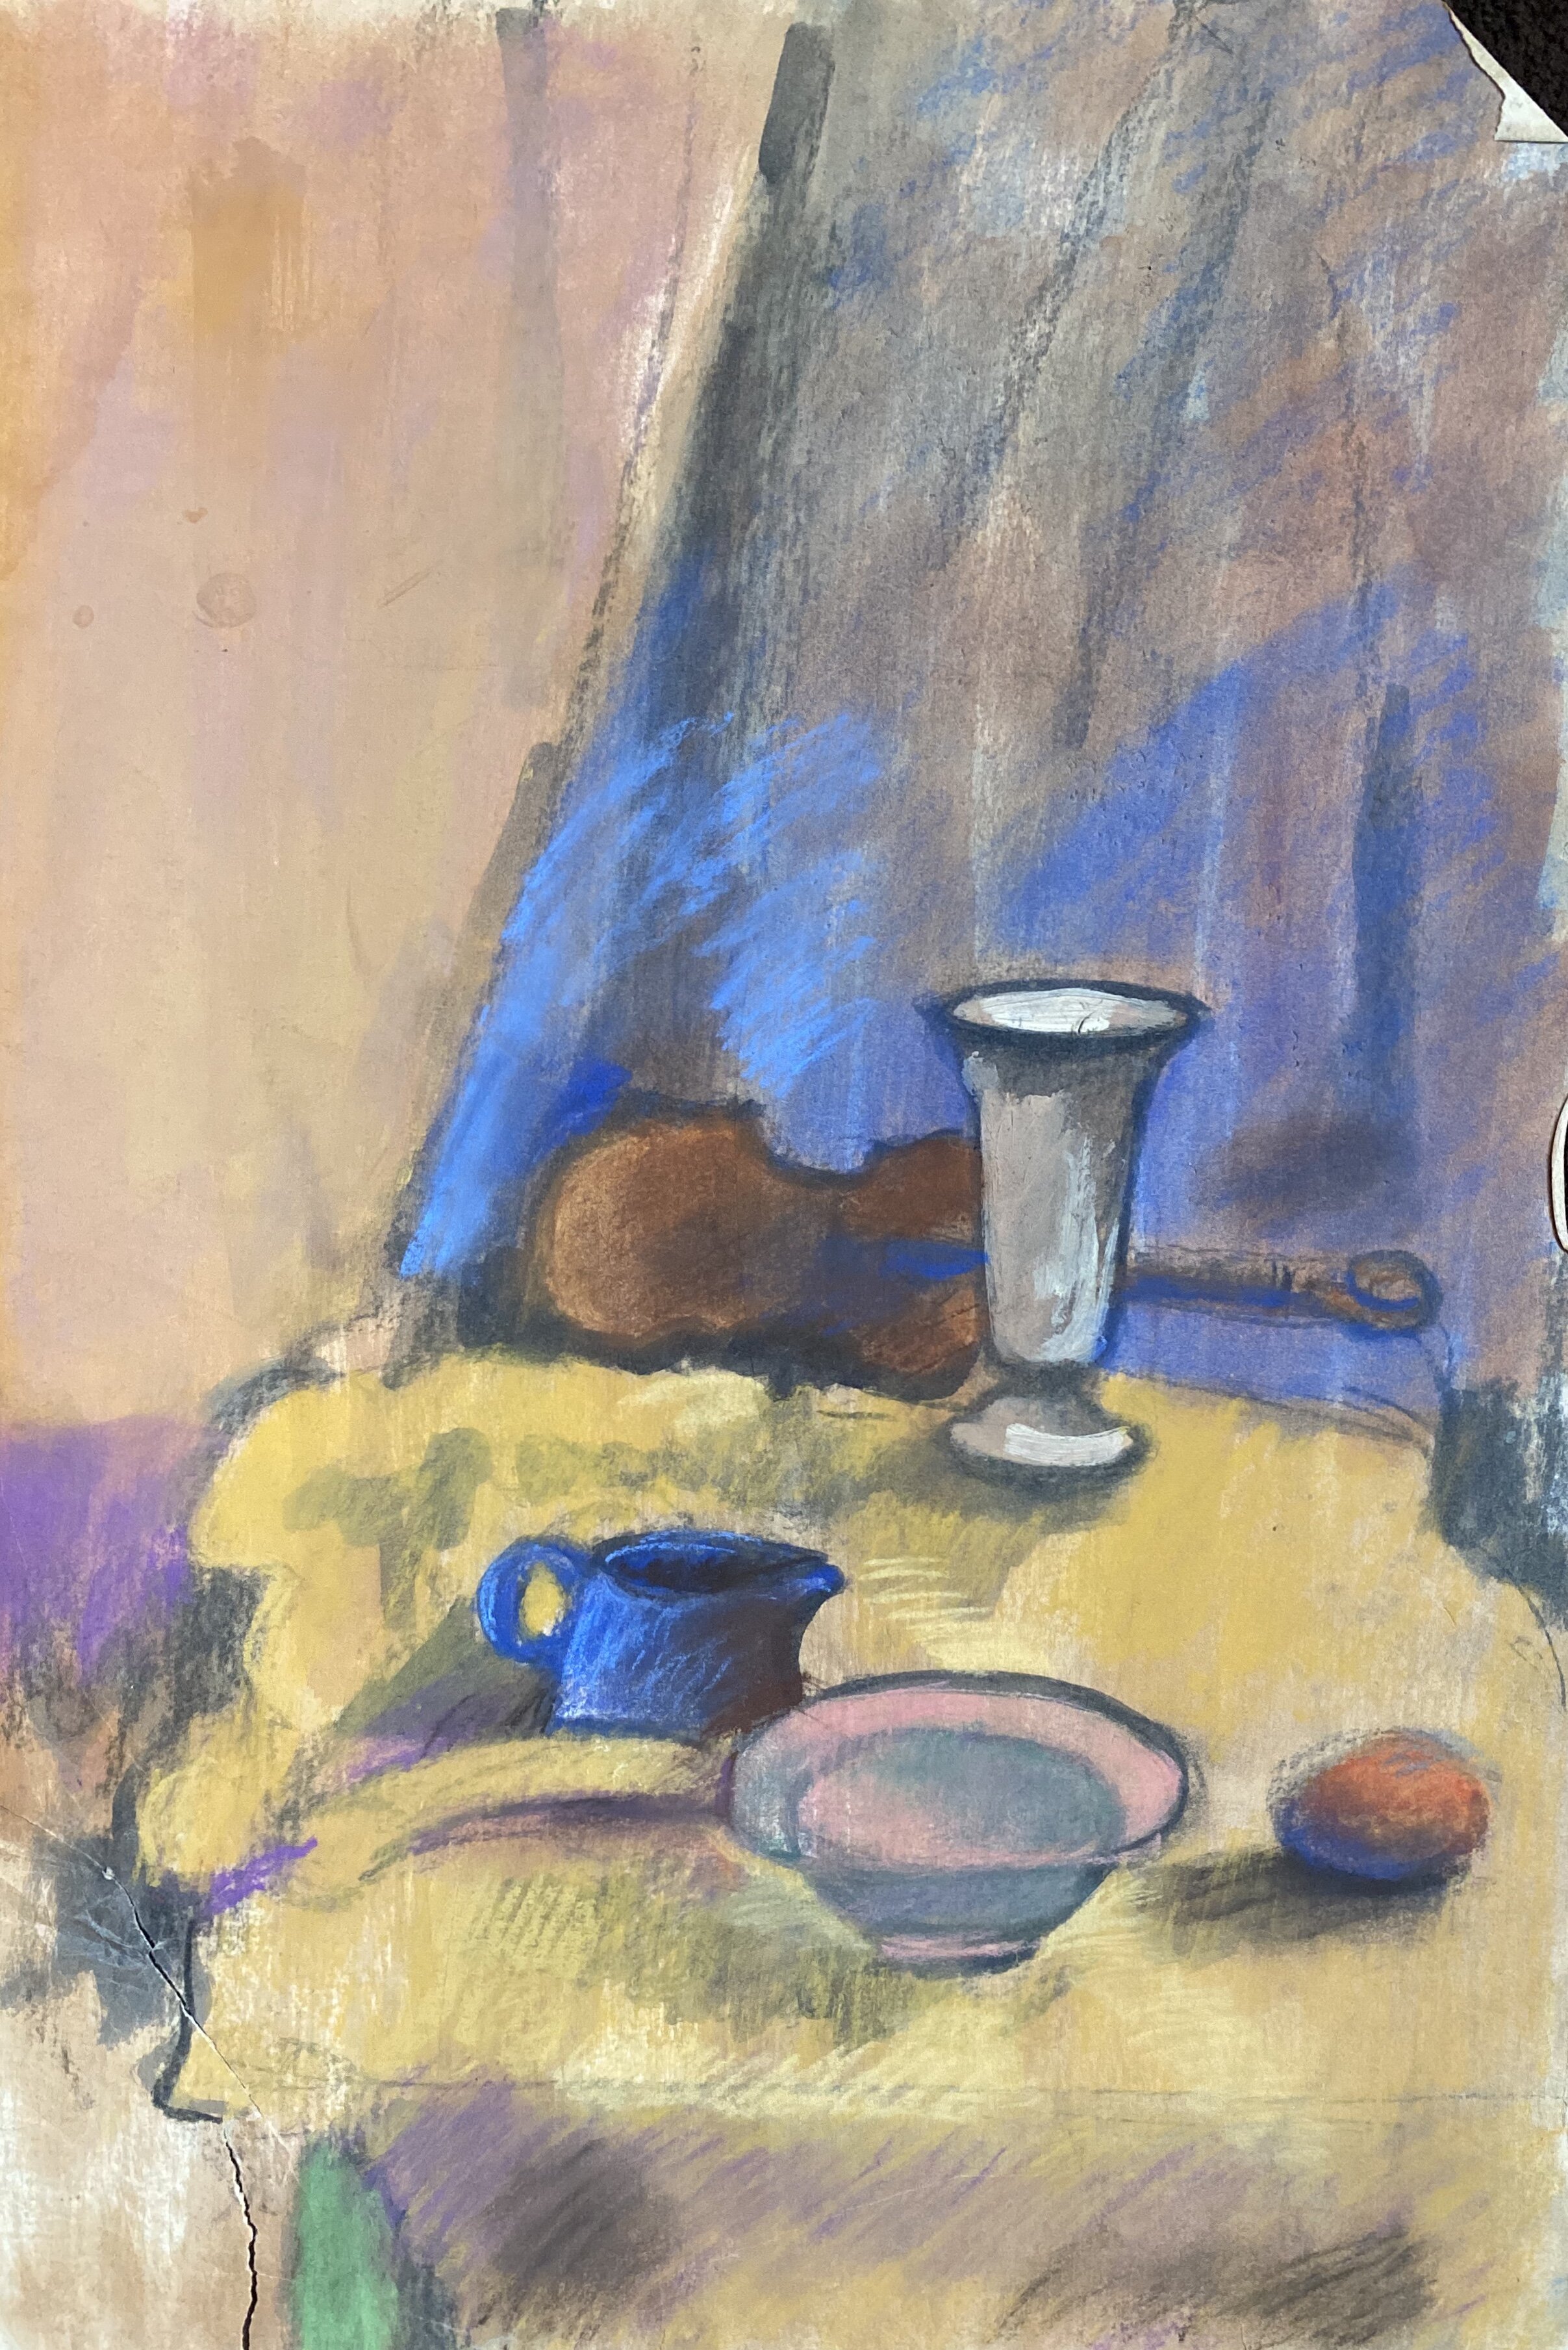   Description:   Still life   Medium:   Pastel and paint on paper   Dimensions:    H: 18 in   W: 12 in 